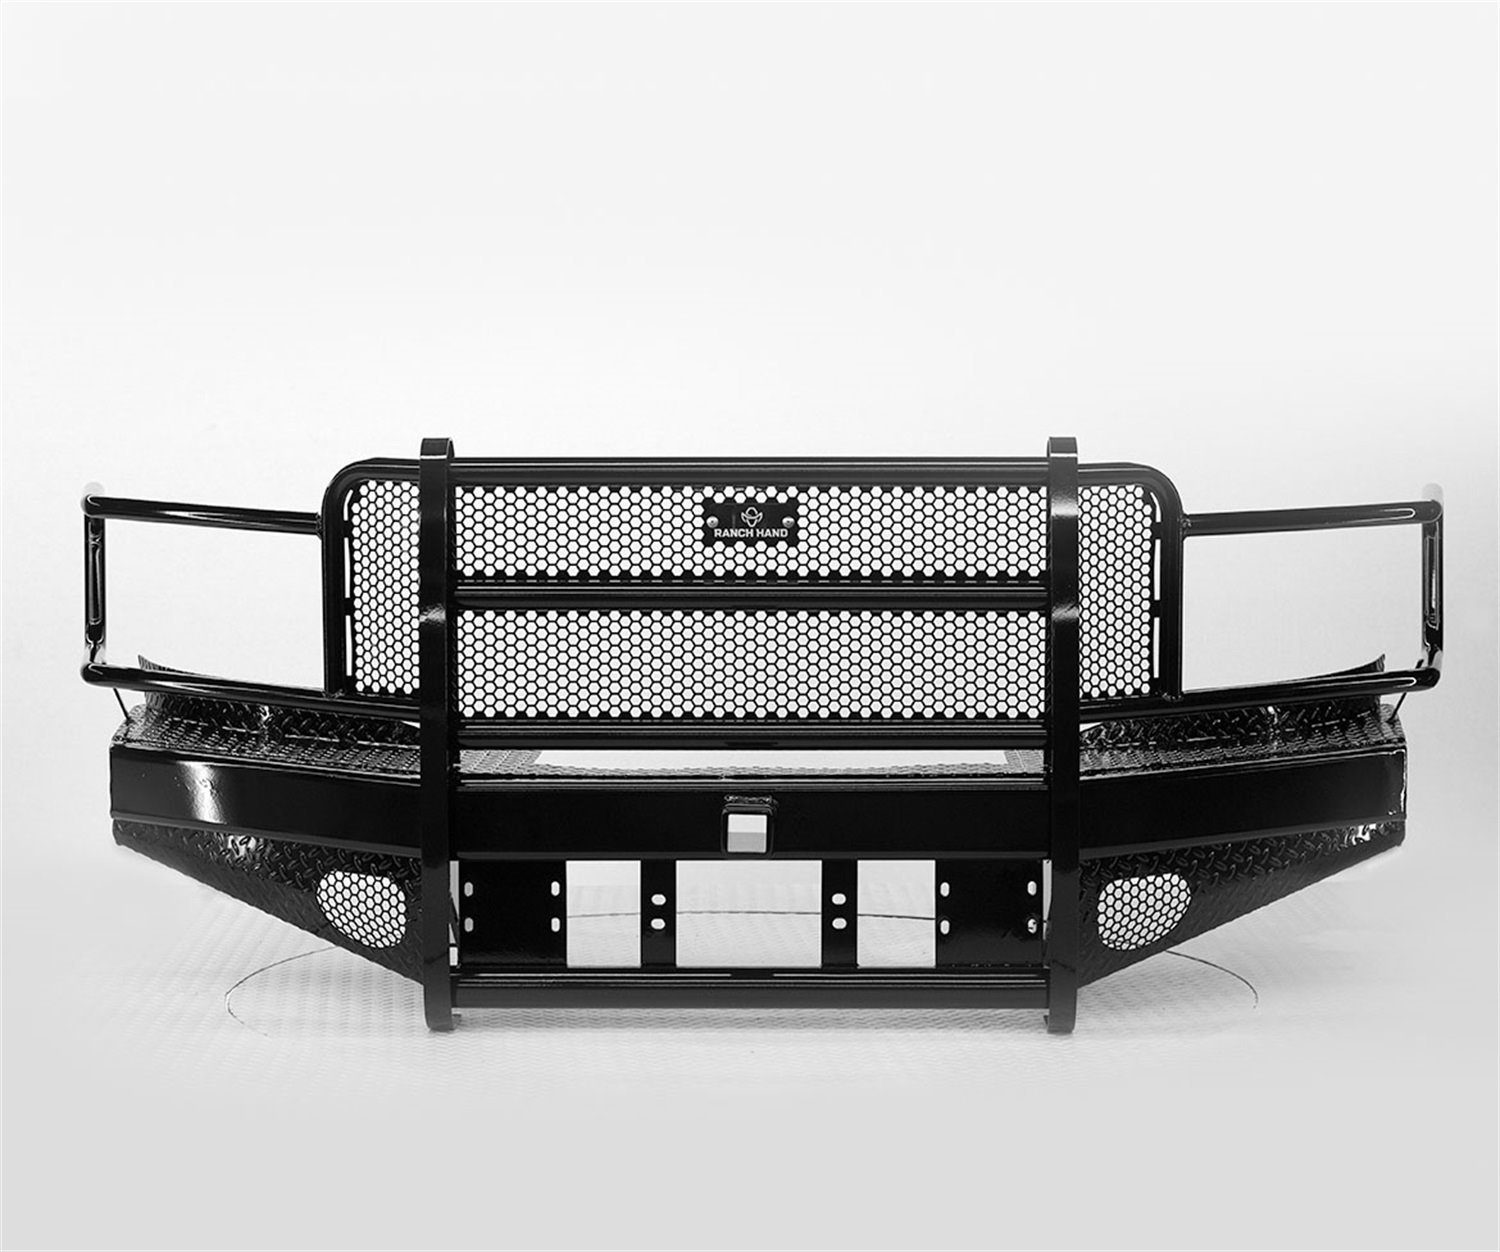 Summit BullNose Series Front Bumper For 2011-2016 Ford F-250/F-350/F-450